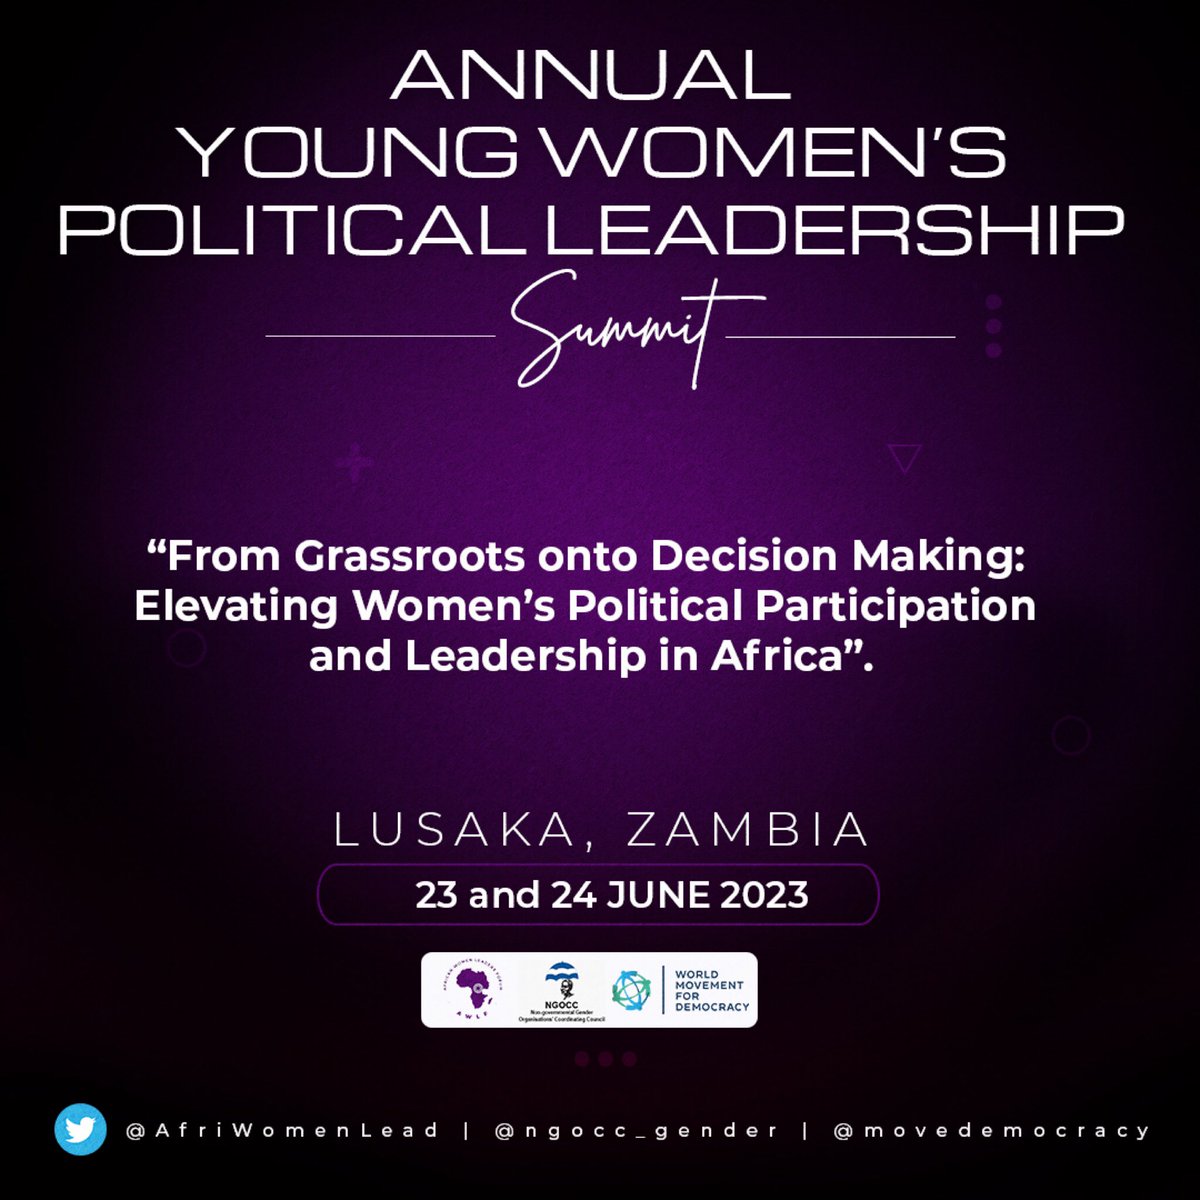 Unlock the Power of Women's Leadership in Africa! Join us in the vibrant city of Lusaka, Zambia, for the highly anticipated 2023 Annual Young Women’s Political Leadership Summit. Let's shatter the barriers of weak democracy and gender inequality that plague our continent.